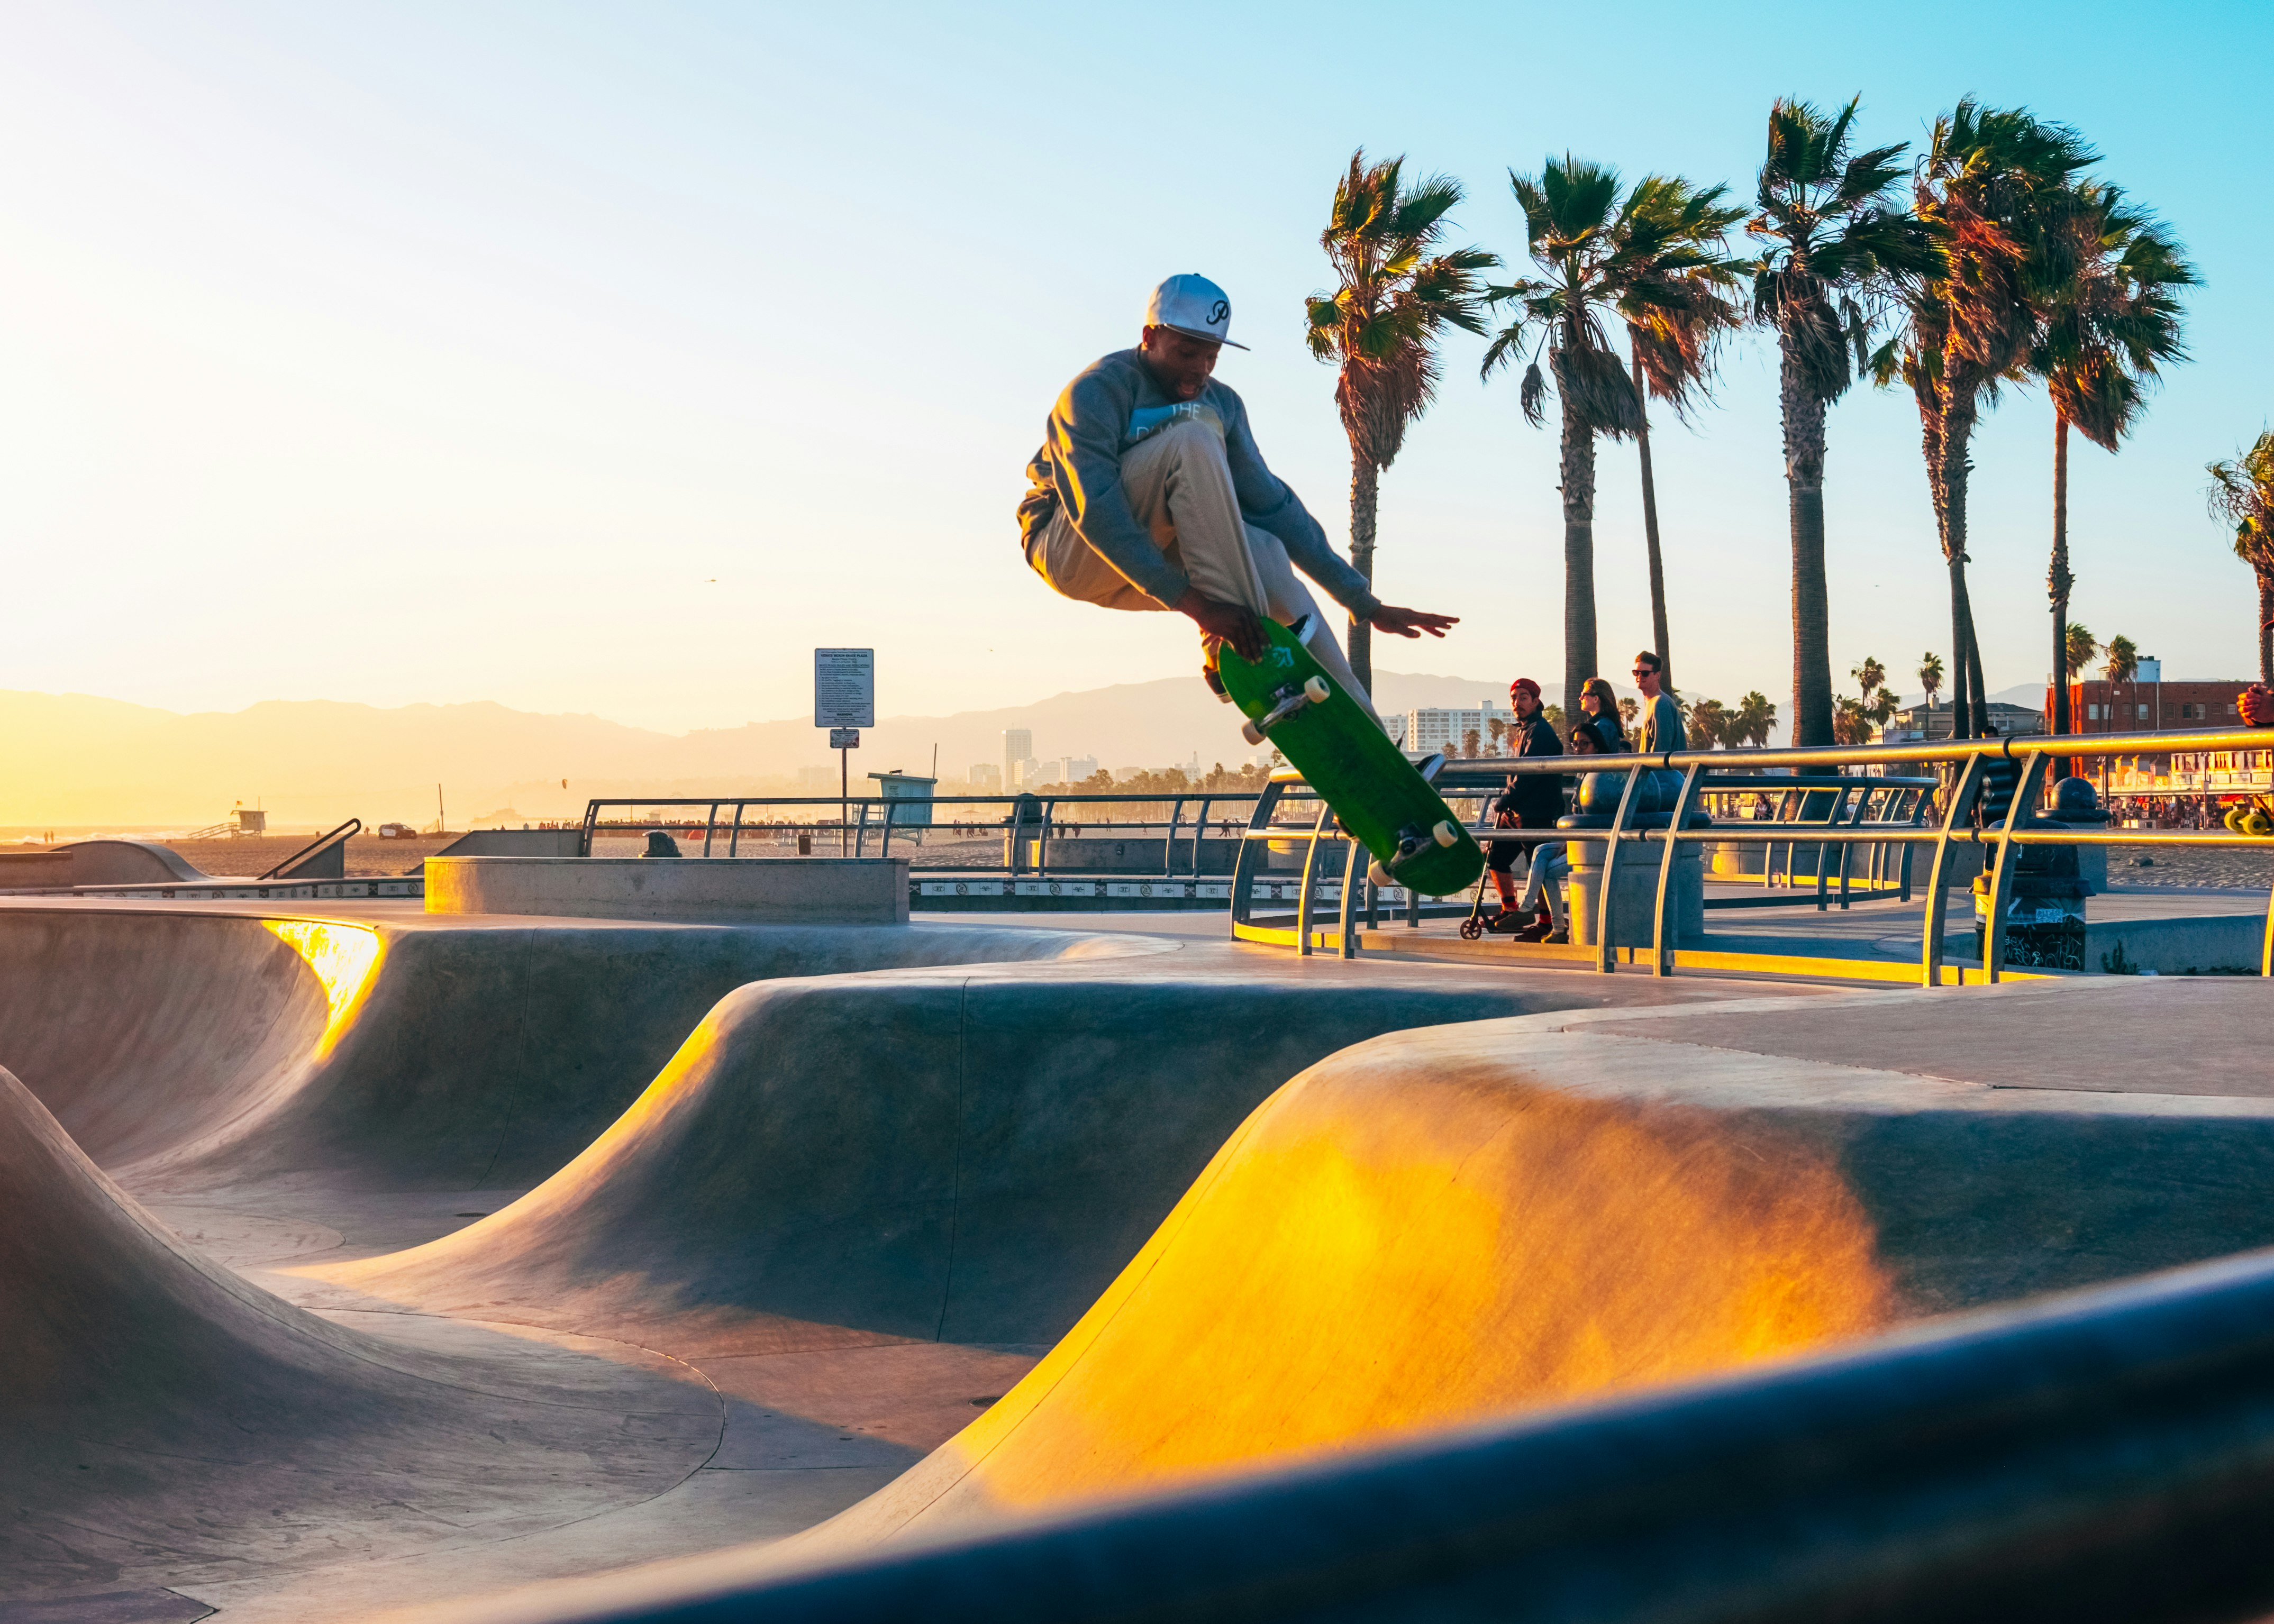 A young man on a skateboard is captured mid-air during a jump at Venice Skate Park; it's sunset and the sun is casting a warm glow on the undulating concrete.